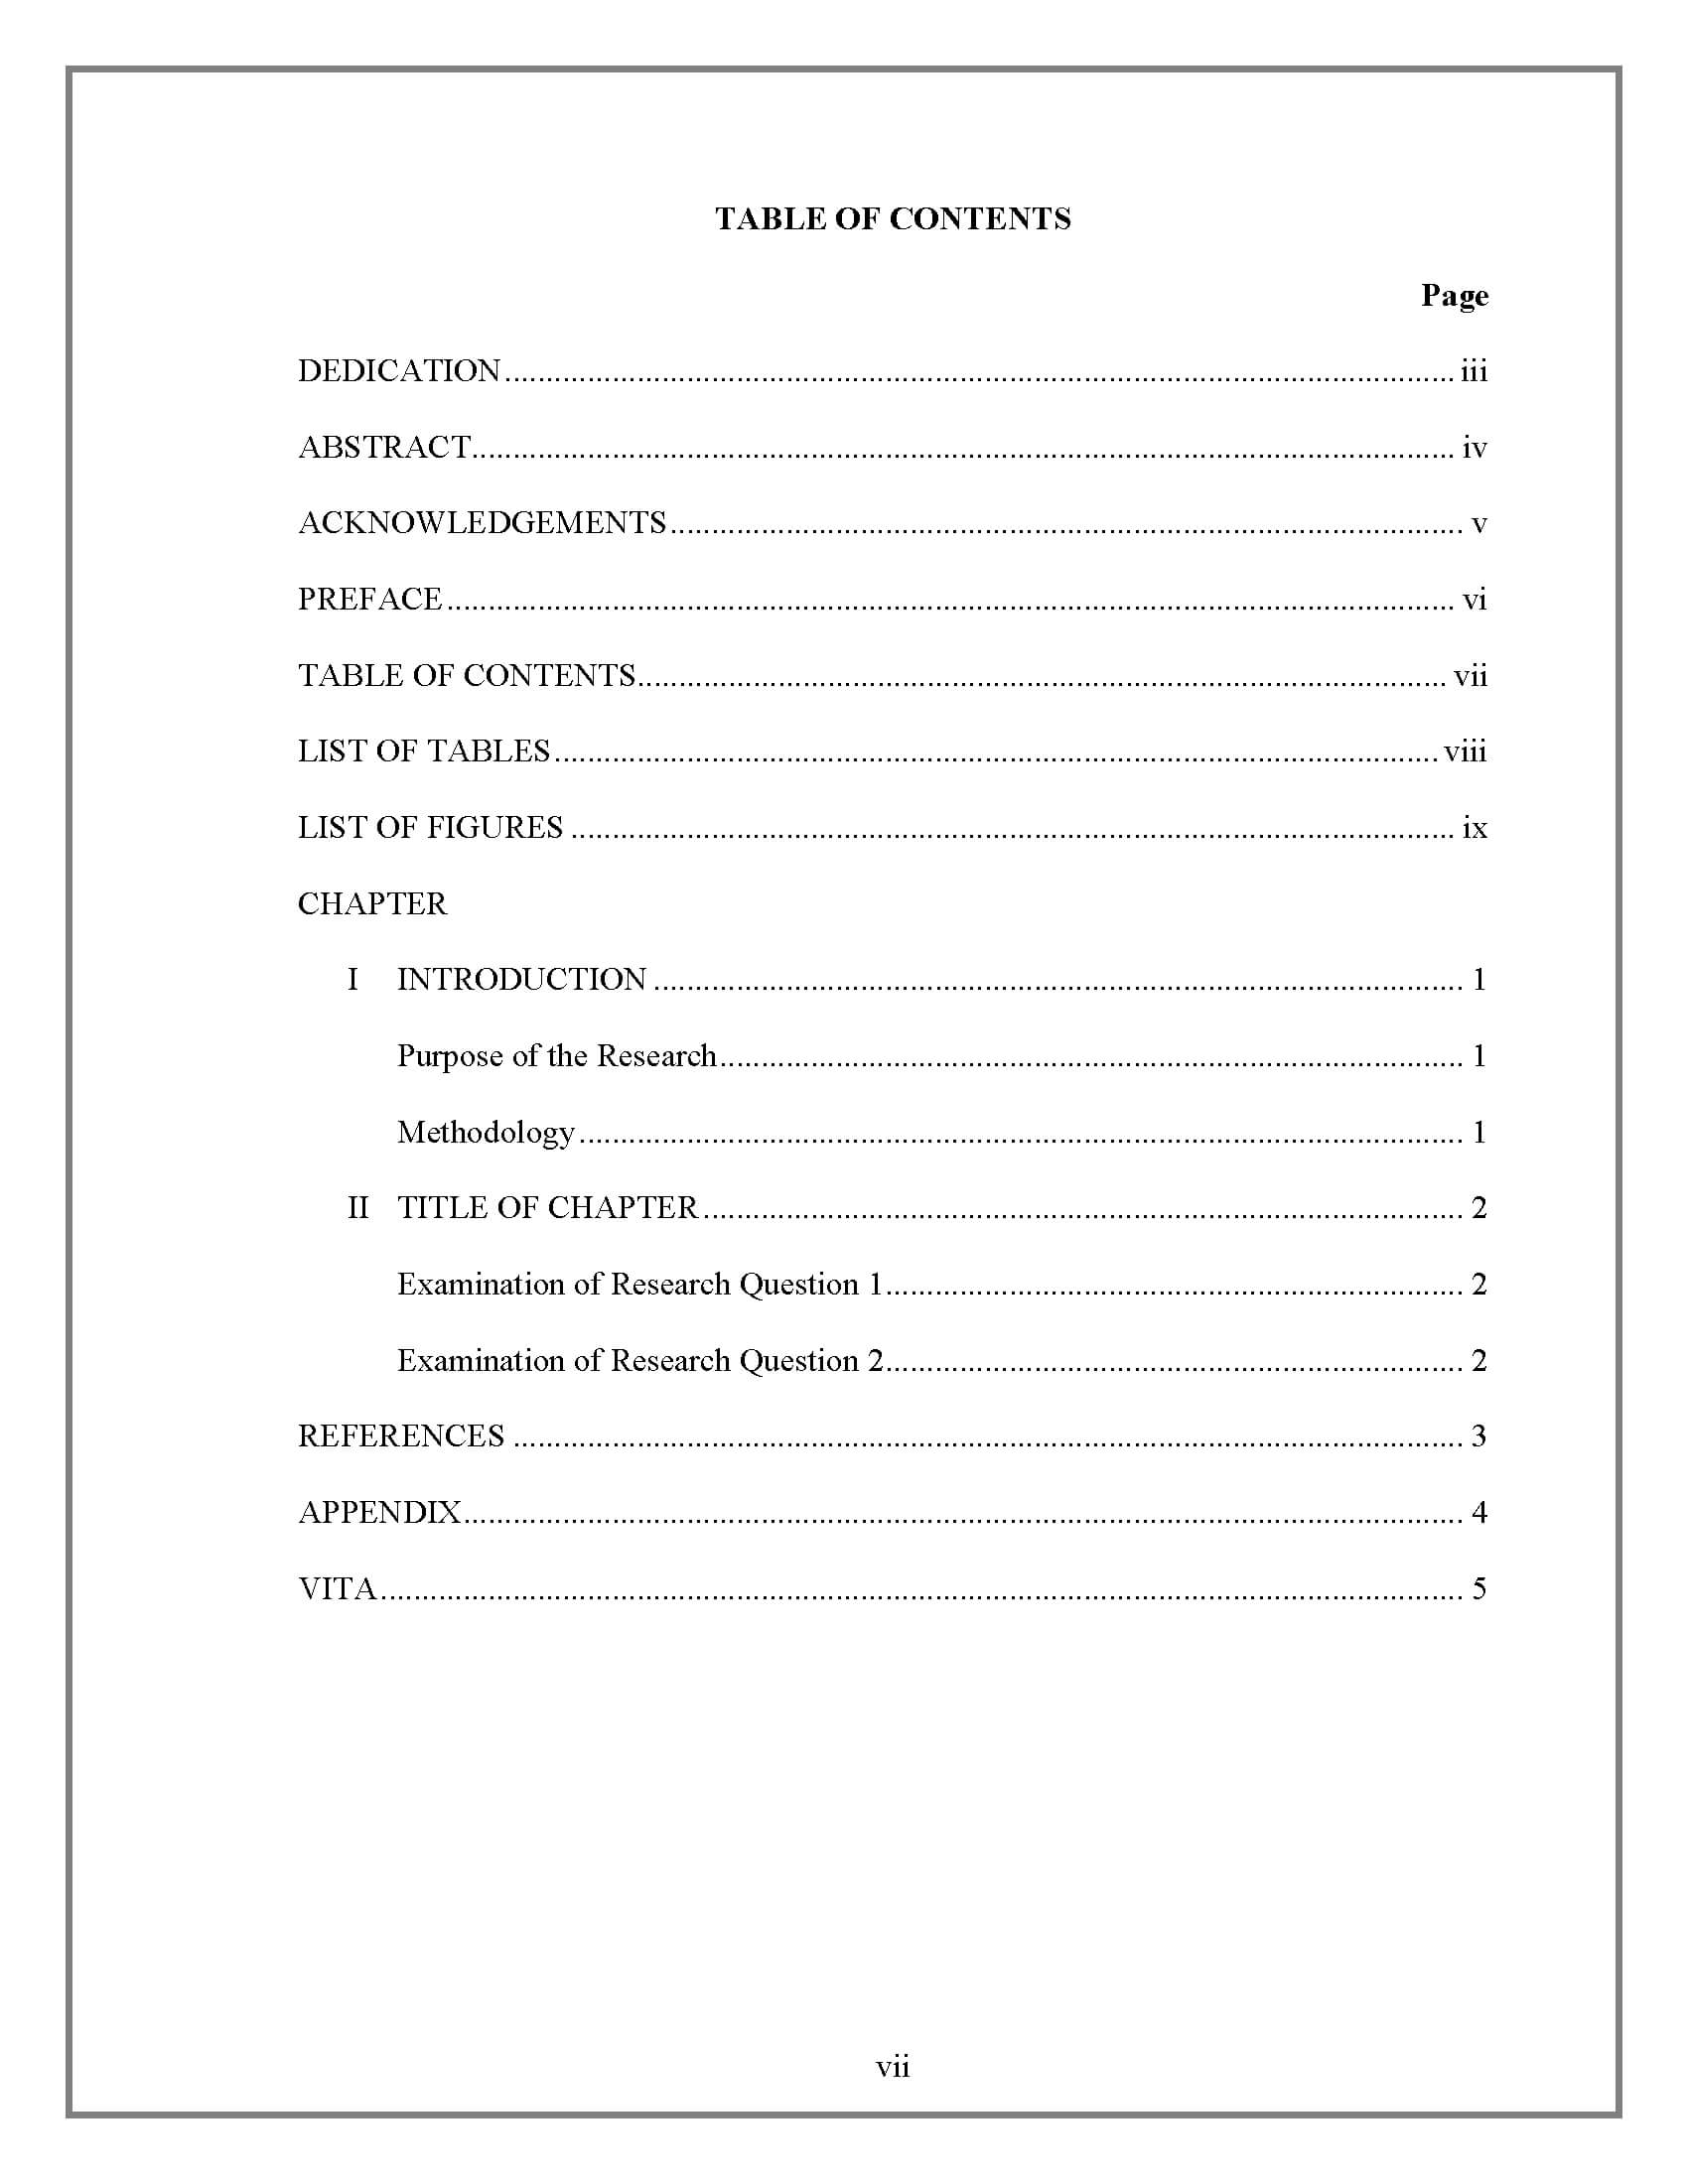 Table Of Contents - Thesis And Dissertation - Research Intended For Microsoft Word Table Of Contents Template